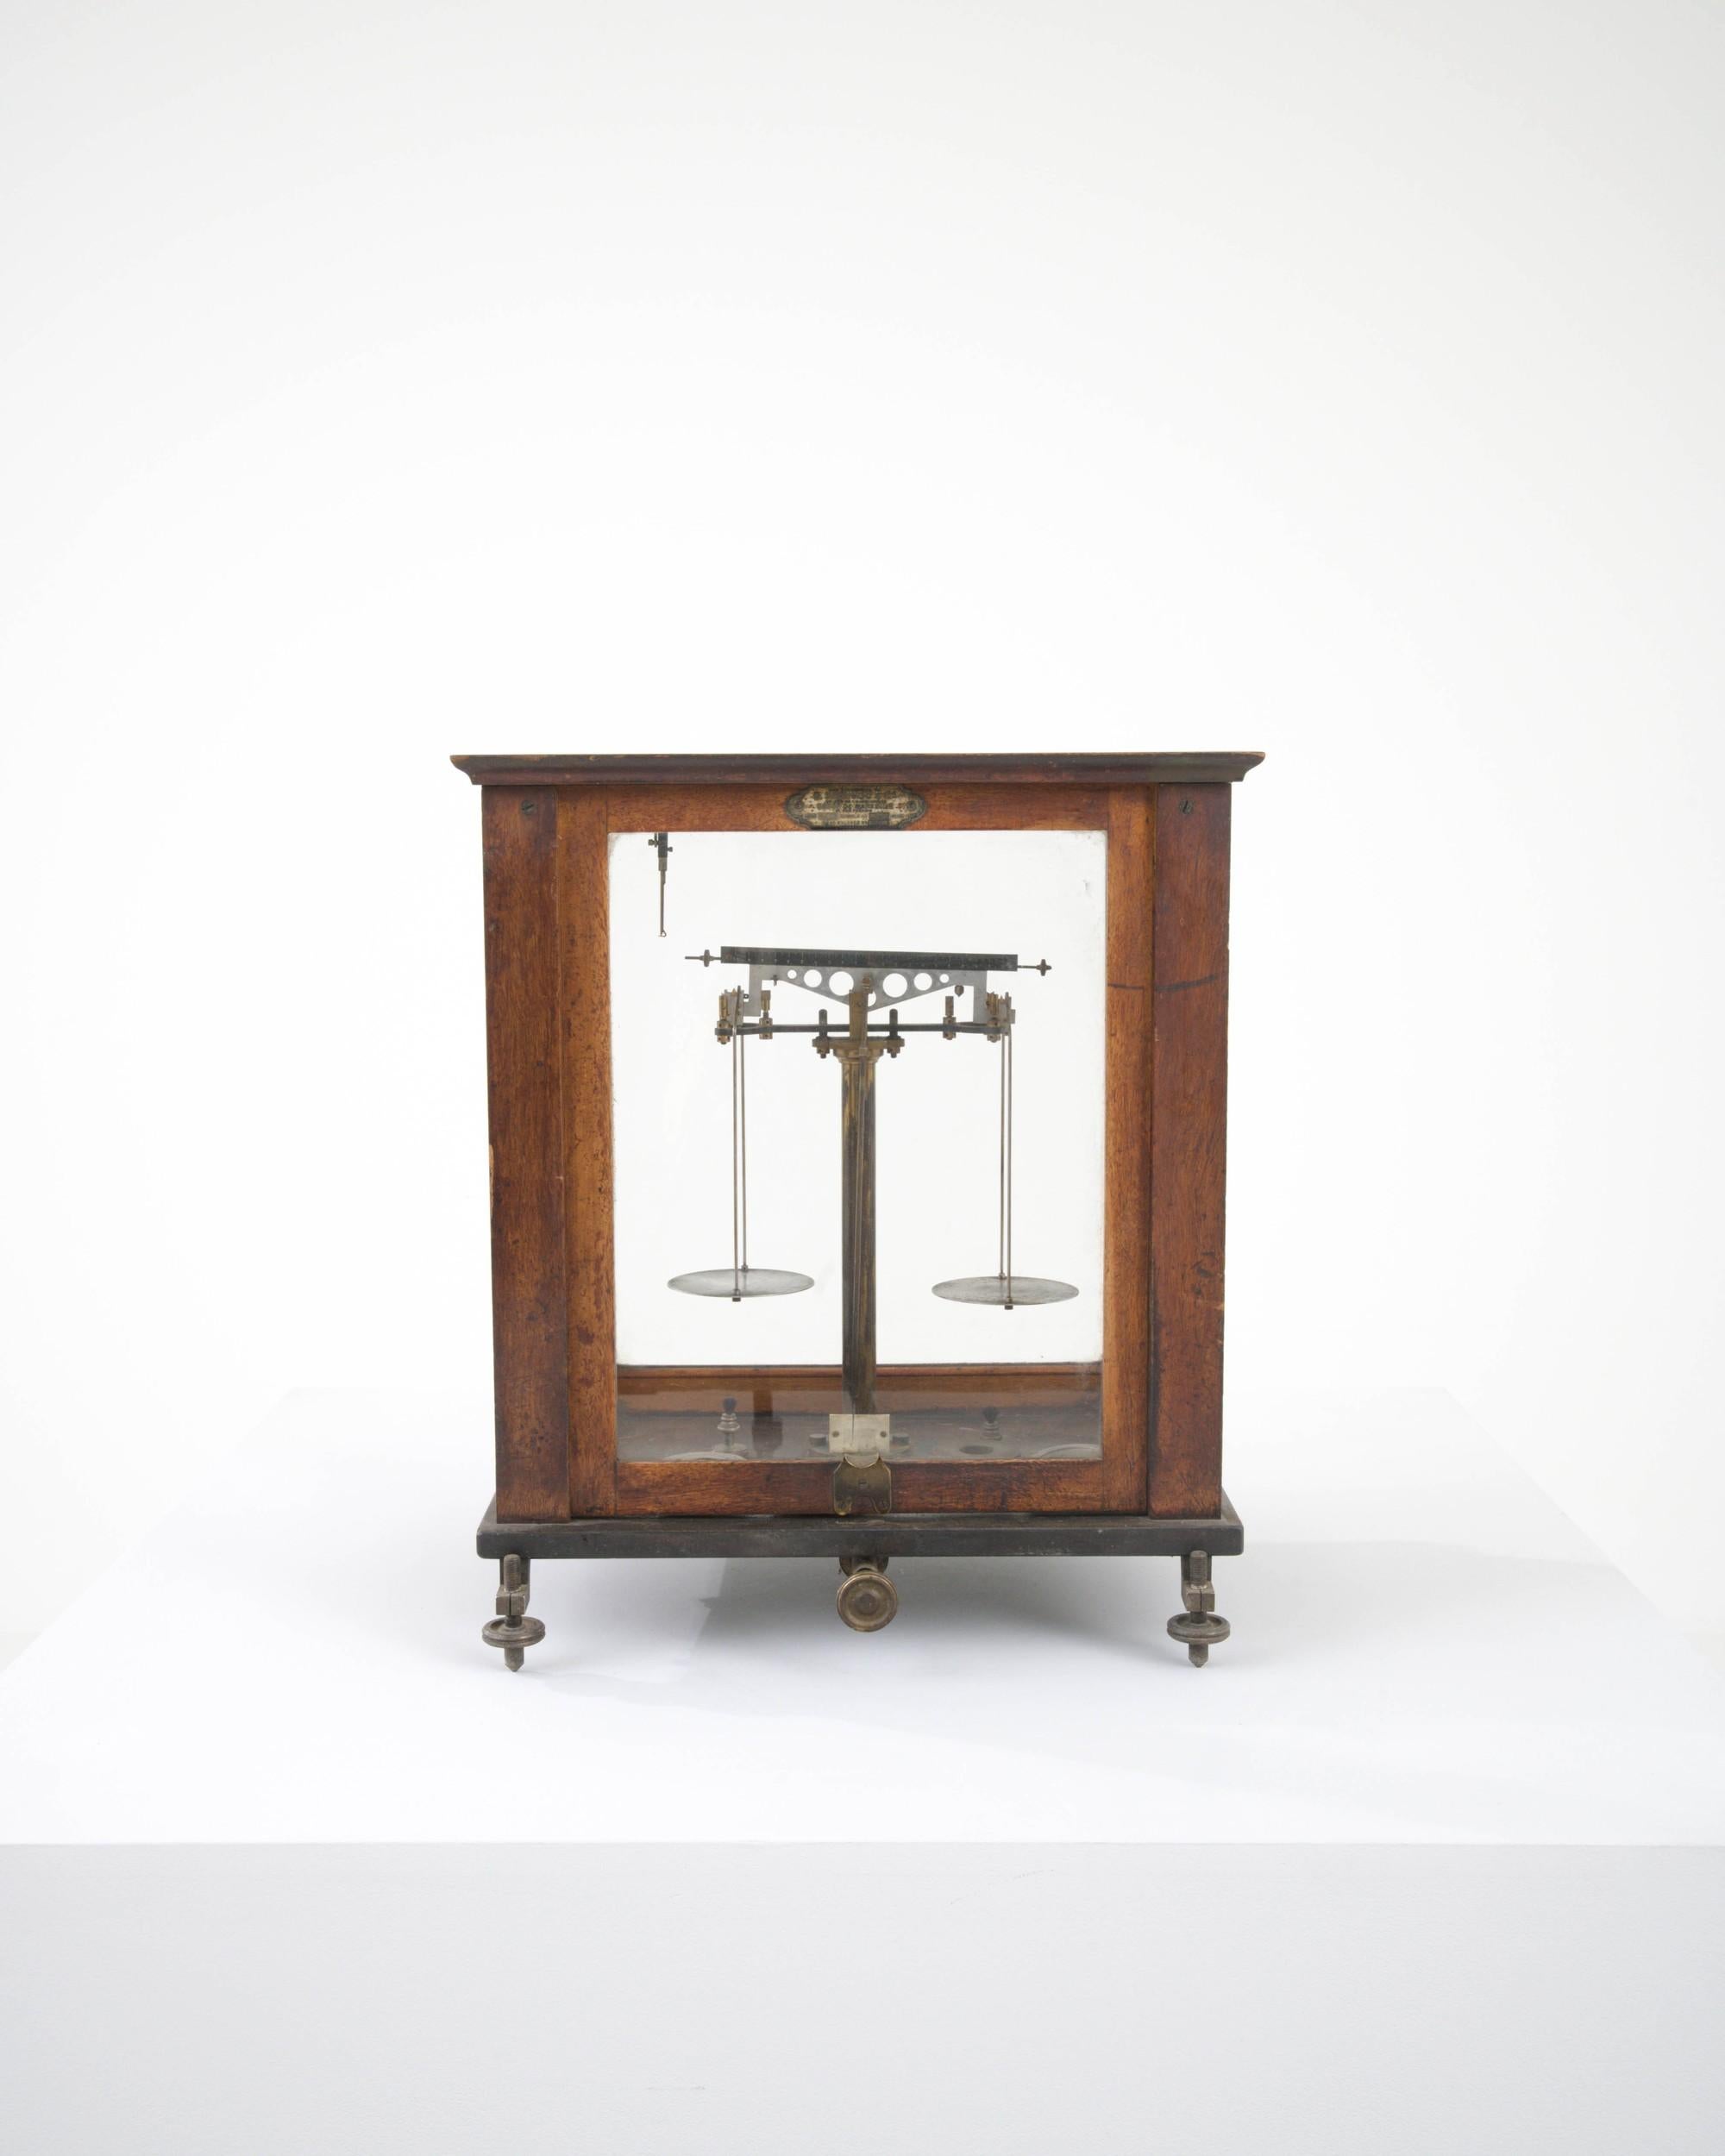 Housed in a wooden and glass vitrine, this small scale was once used for precision measurements. Made at the turn of the 19th Century in France, this mechanical wonder was crafted with an eye for aesthetics, the richly polished wood and meticulously